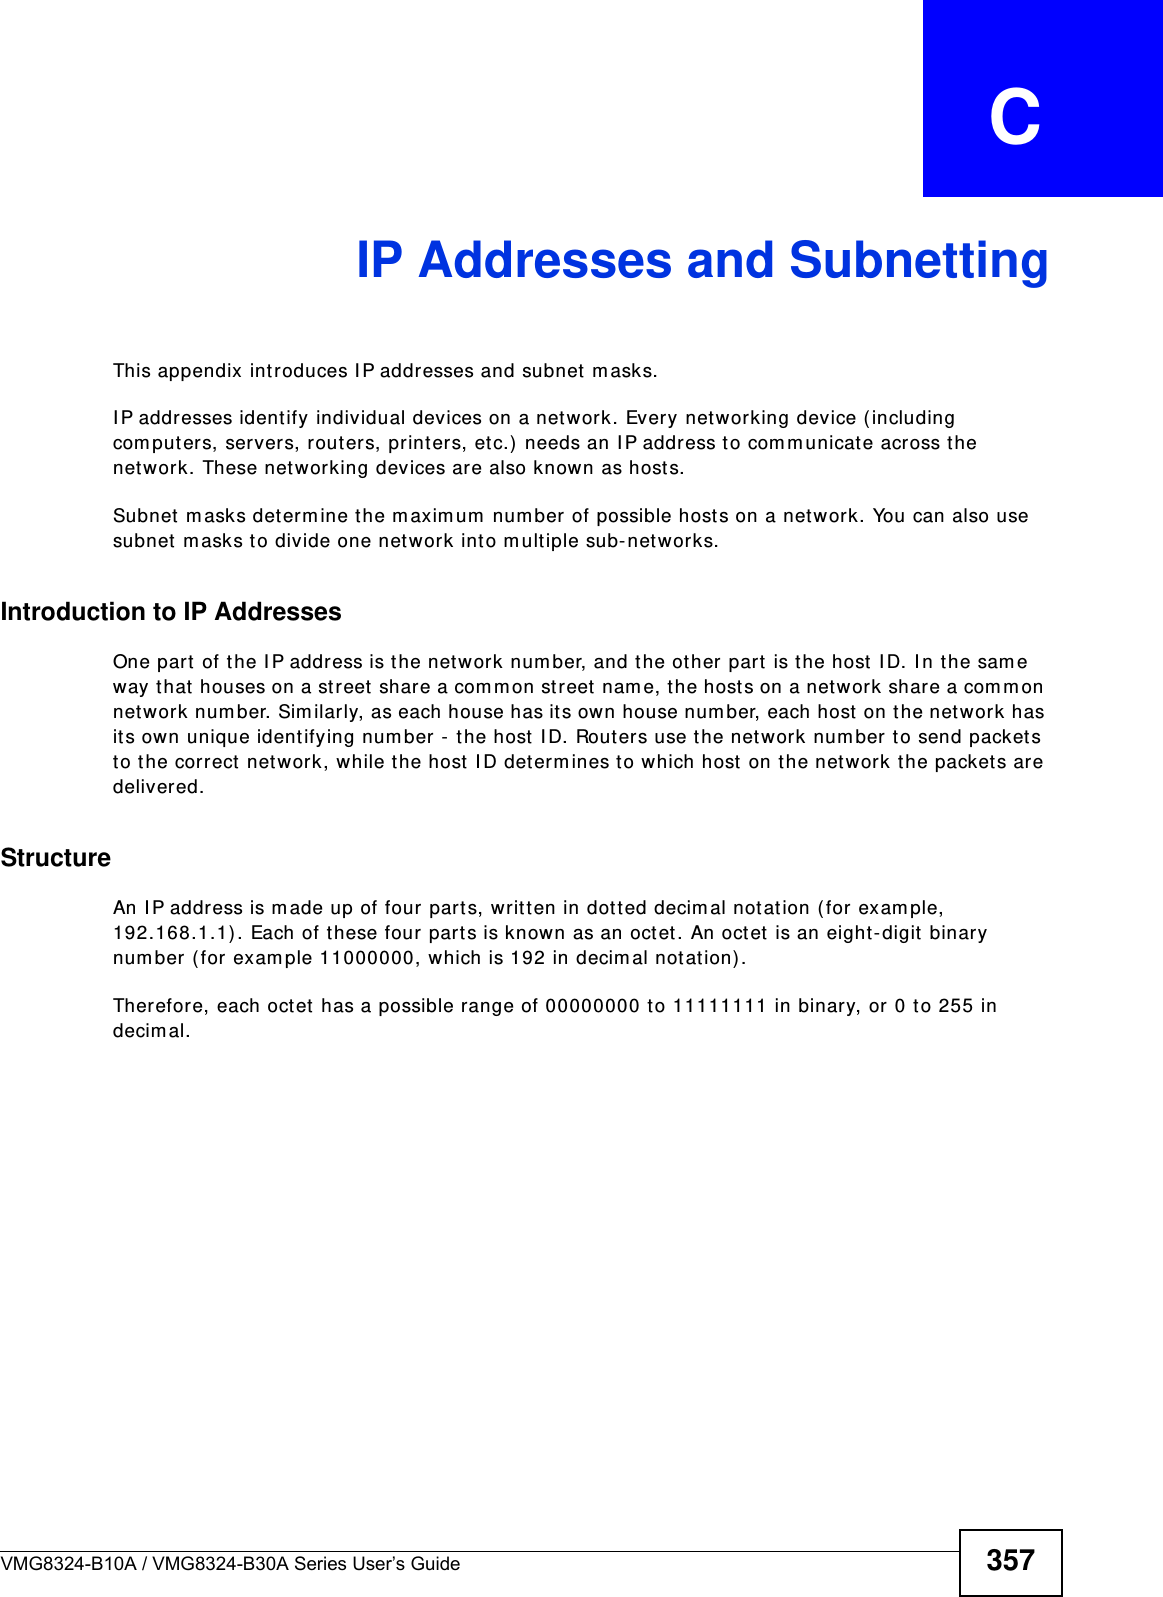 VMG8324-B10A / VMG8324-B30A Series User’s Guide 357APPENDIX   CIP Addresses and SubnettingThis appendix int roduces I P addresses and subnet  m asks. I P addresses identify individual devices on a network. Every net working device ( including com puters, servers, rout ers, print ers, et c.)  needs an I P address to comm unicat e across t he net work. These net working devices are also known as hosts.Subnet m asks determ ine t he m axim um  num ber of possible hosts on a network. You can also use subnet  m asks t o divide one net work int o m ultiple sub- net works.Introduction to IP AddressesOne part of t he I P address is t he net work num ber, and t he other part is t he host I D. I n t he sam e way t hat  houses on a st reet share a com m on st reet  nam e, t he host s on a net work share a com m on net work num ber. Sim ilarly, as each house has its own house num ber, each host on t he net work has it s own unique identifying num ber - the host I D. Rout ers use t he net work num ber t o send packet s to t he correct net work, while the host I D determ ines to which host on t he net work the packets are delivered.StructureAn I P address is m ade up of four parts, writ ten in dott ed decim al notat ion ( for exam ple, 192.168.1.1). Each of t hese four parts is known as an oct et . An oct et is an eight- digit  binary num ber ( for  exam ple 11000000, which is 192 in decim al not ation) . Therefore, each octet  has a possible range of 00000000 to 11111111 in binary, or 0 to 255 in decim al.